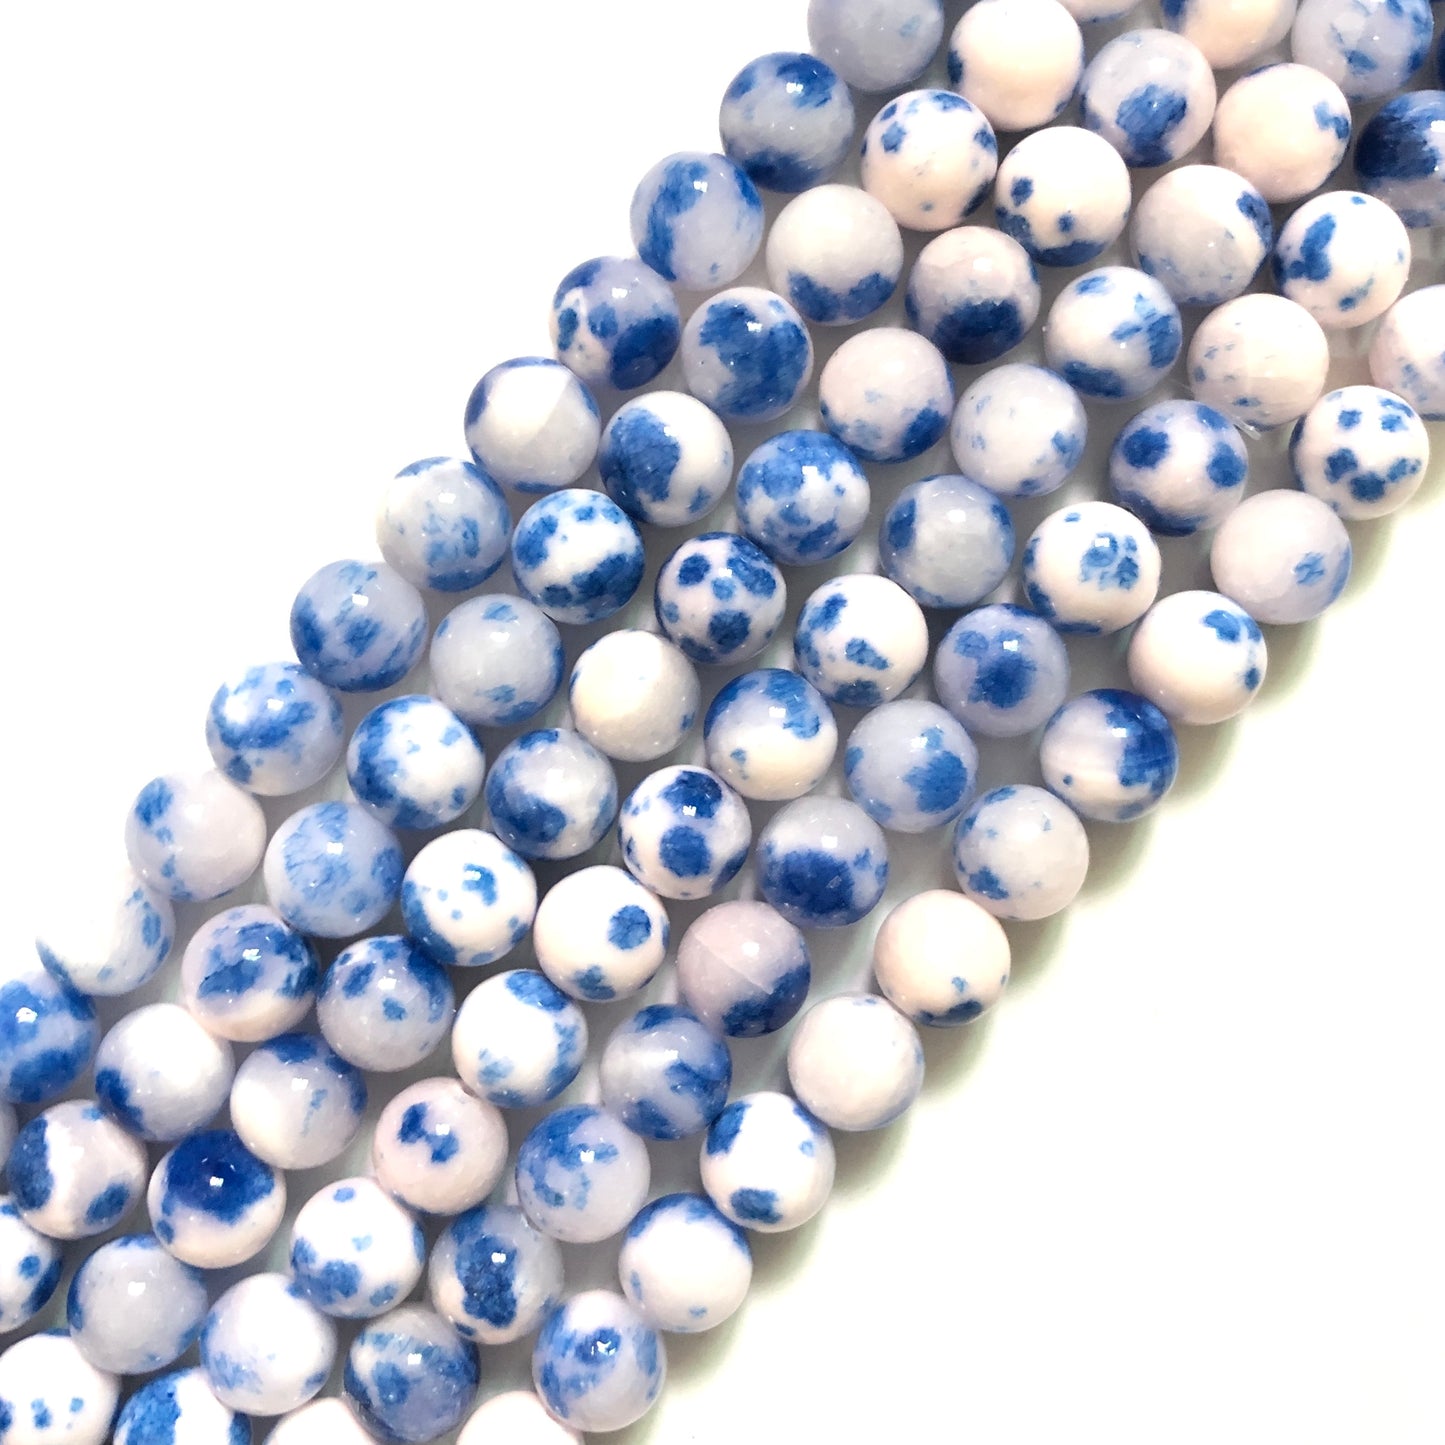 2 Strands/lot 8mm, 10mm, 12mm Blue White Persian Jade Round Stone Beads Stone Beads 12mm Stone Beads 8mm Stone Beads New Beads Arrivals Persian Jade Beads Round Jade Beads Charms Beads Beyond